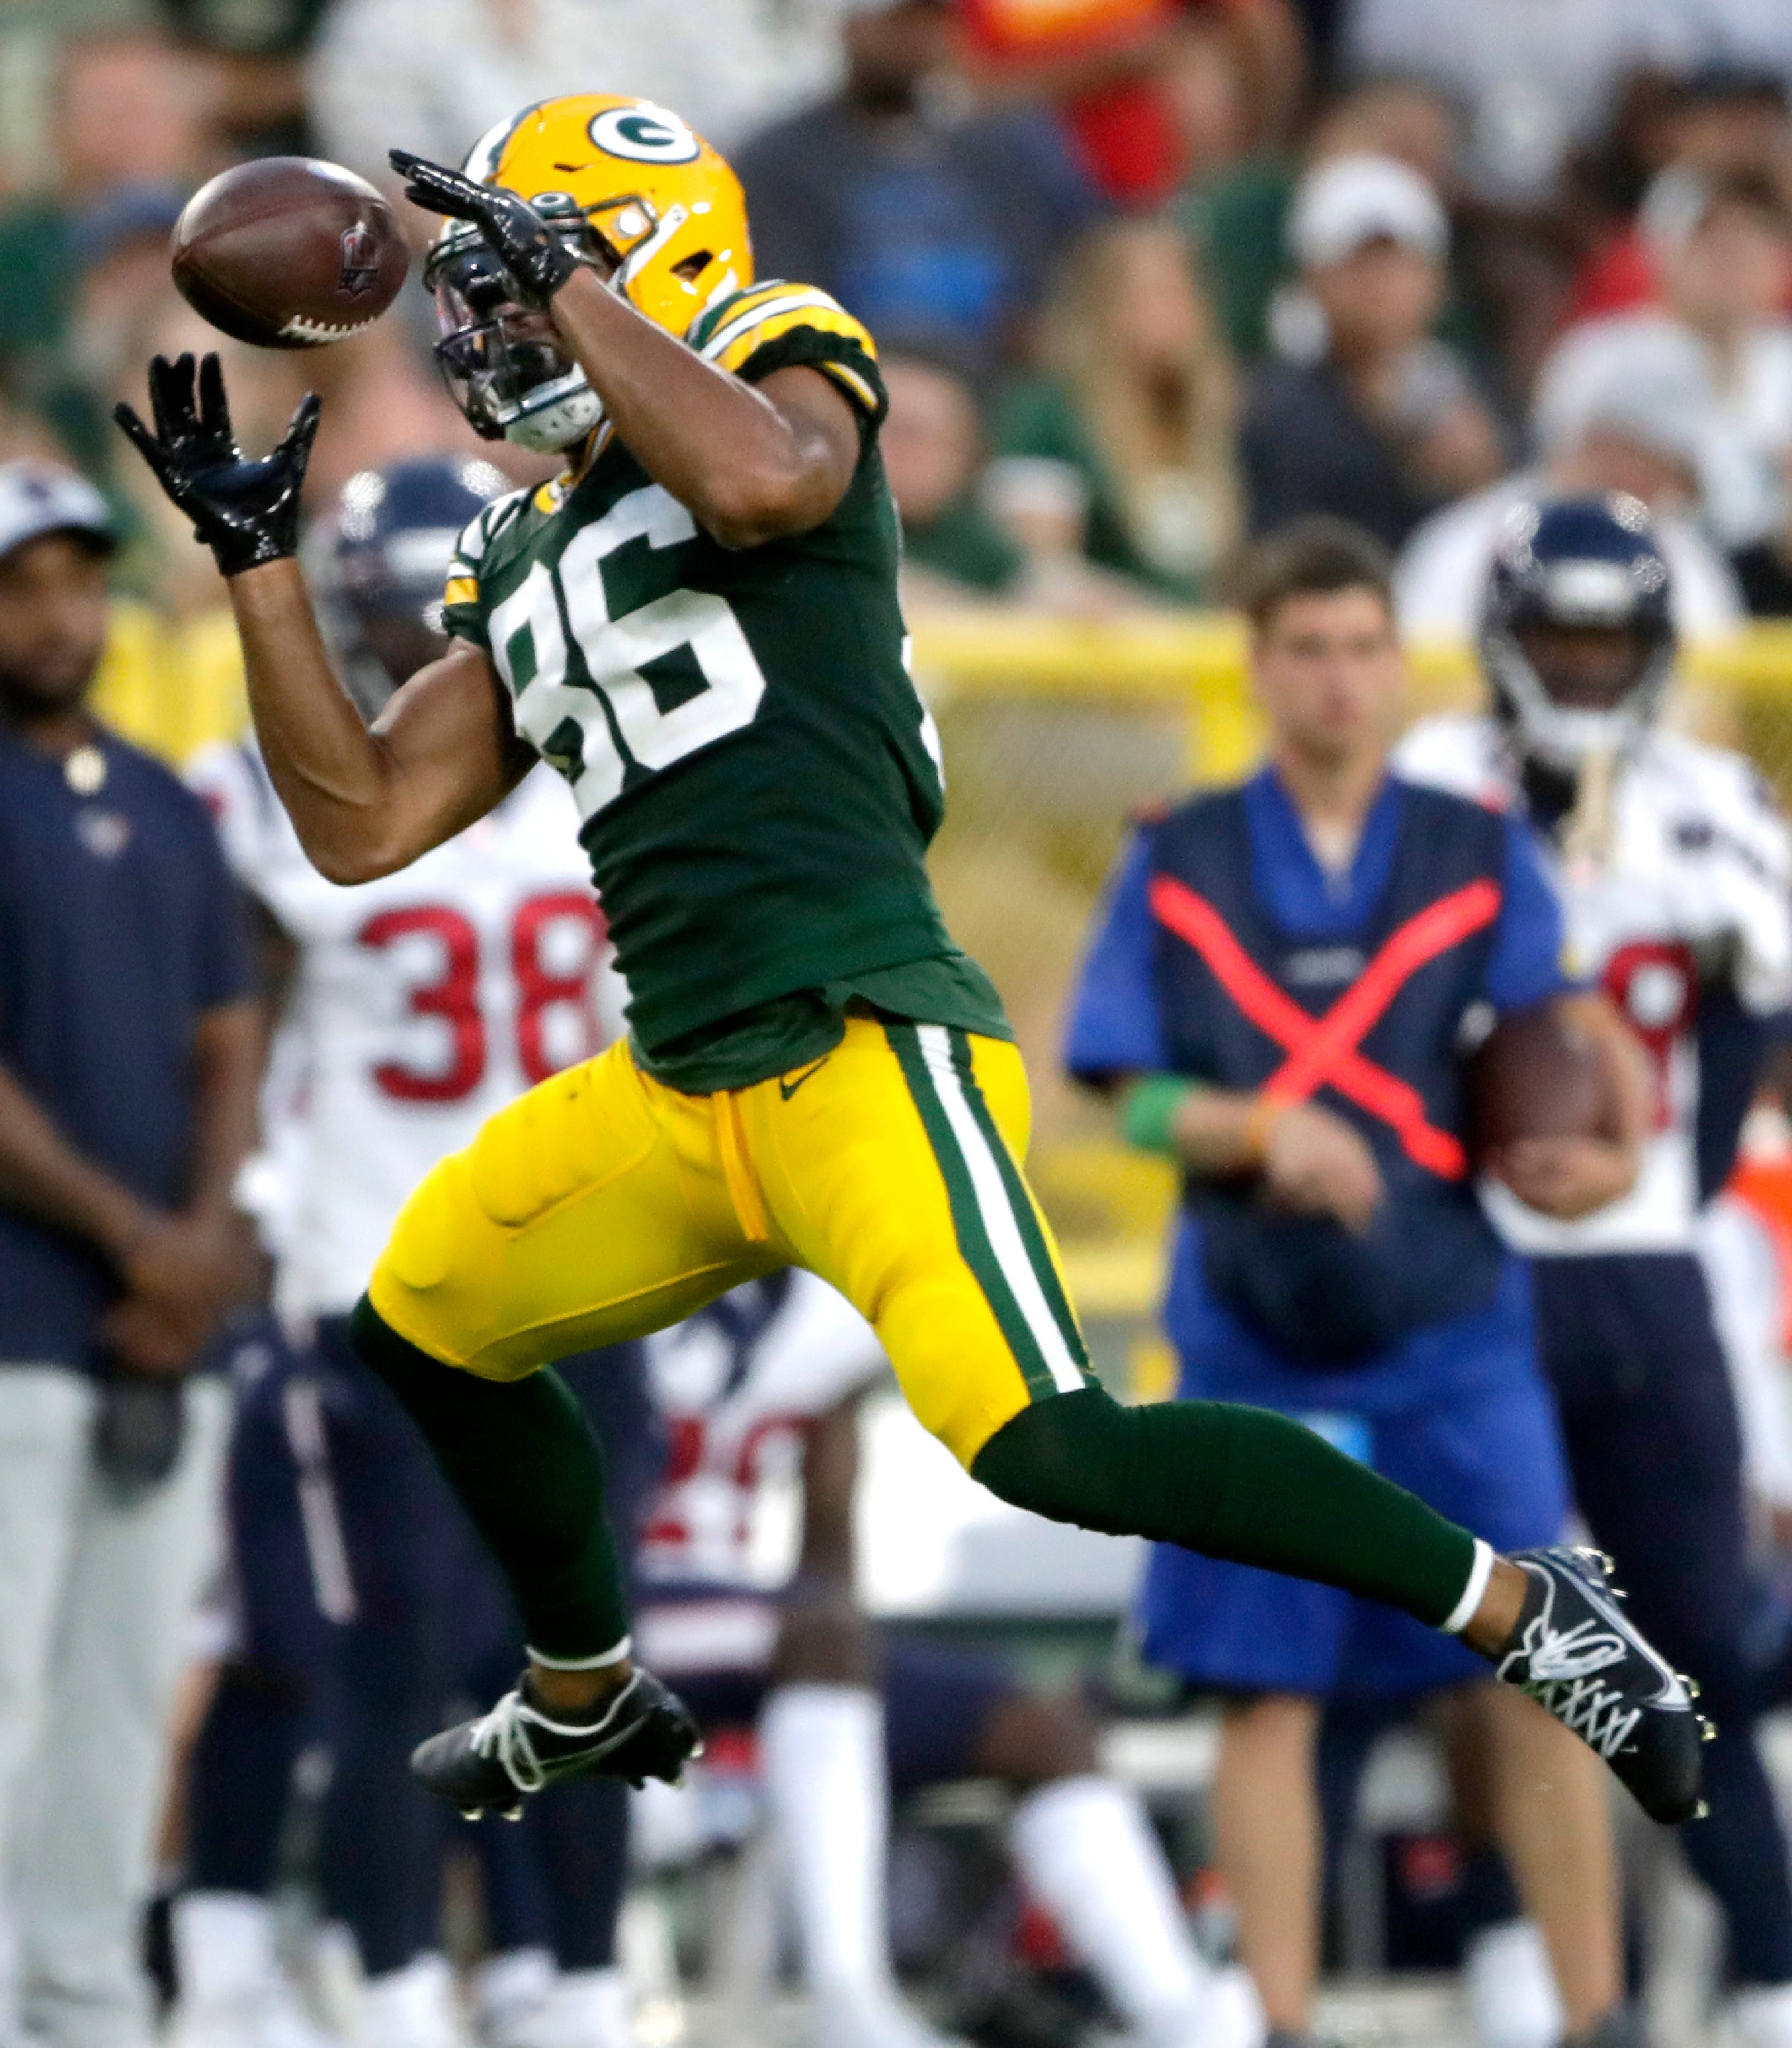 Green Bay Packers wide receiver Malik Taylor (86) makes a catch against the Houston Texans during a preseason game on Saturday, Aug. 14, 2021, at Lambeau Field in Green Bay.